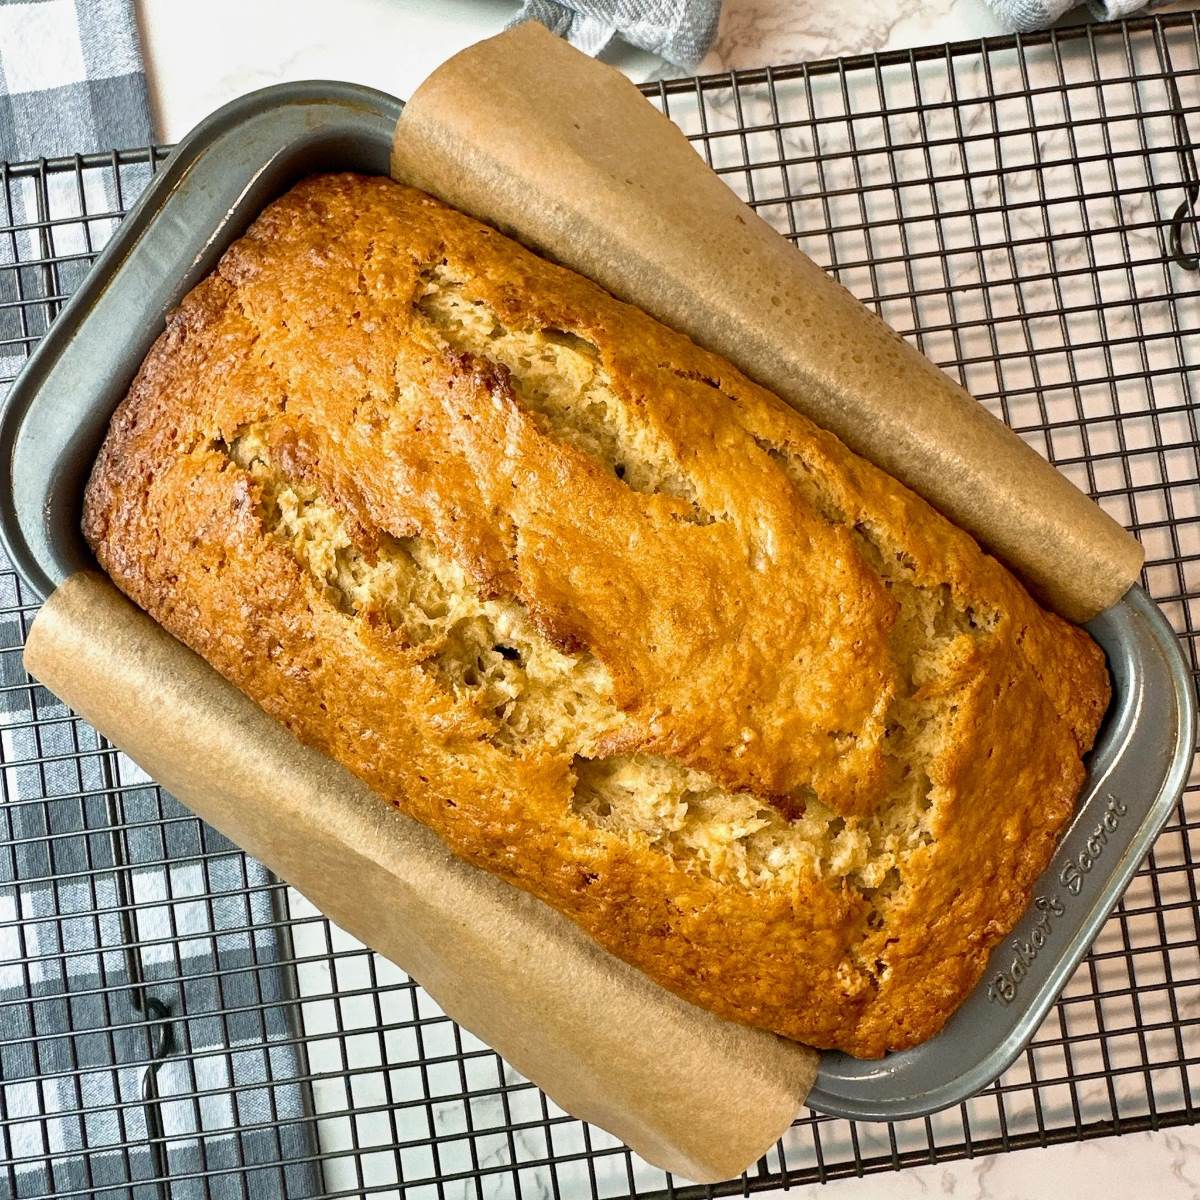 How To Store Banana Bread After Baking